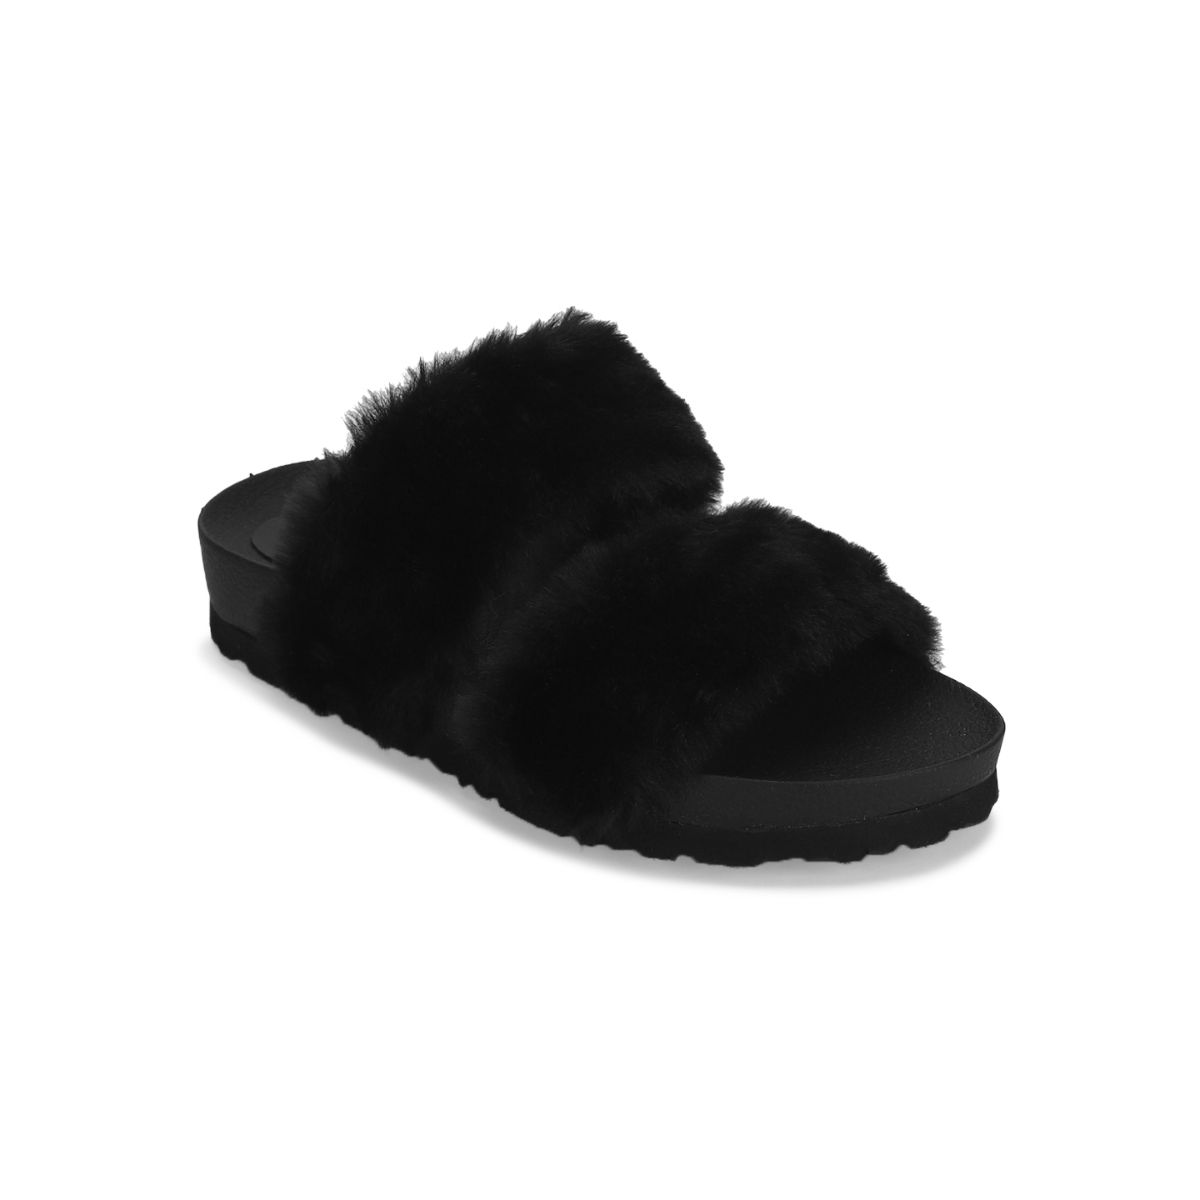 Truffle Collection Black Faux Fur Fuzzy Slip Ons - UK 3 (Black) At Nykaa, Best Beauty Products Online